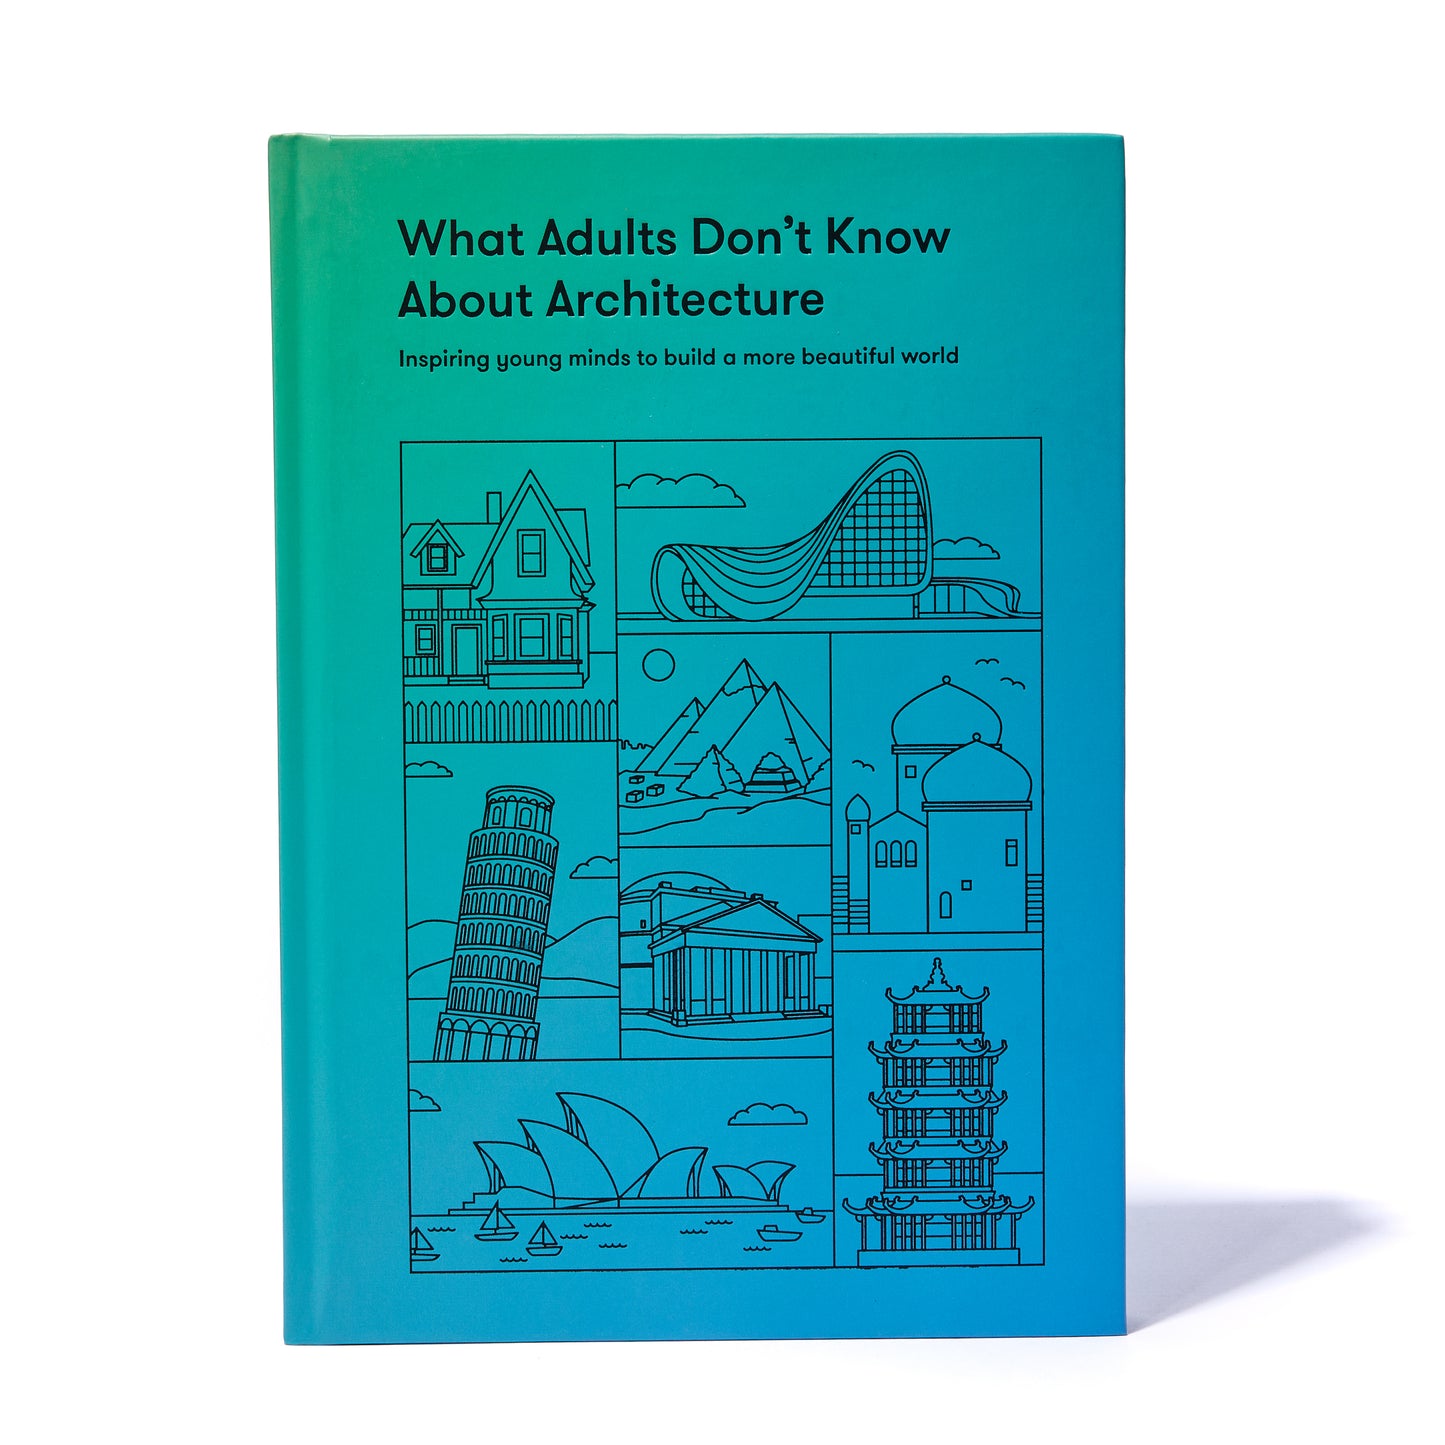 WHAT ADULTS DON'T KNOW ABOUT ARCHITECTURE